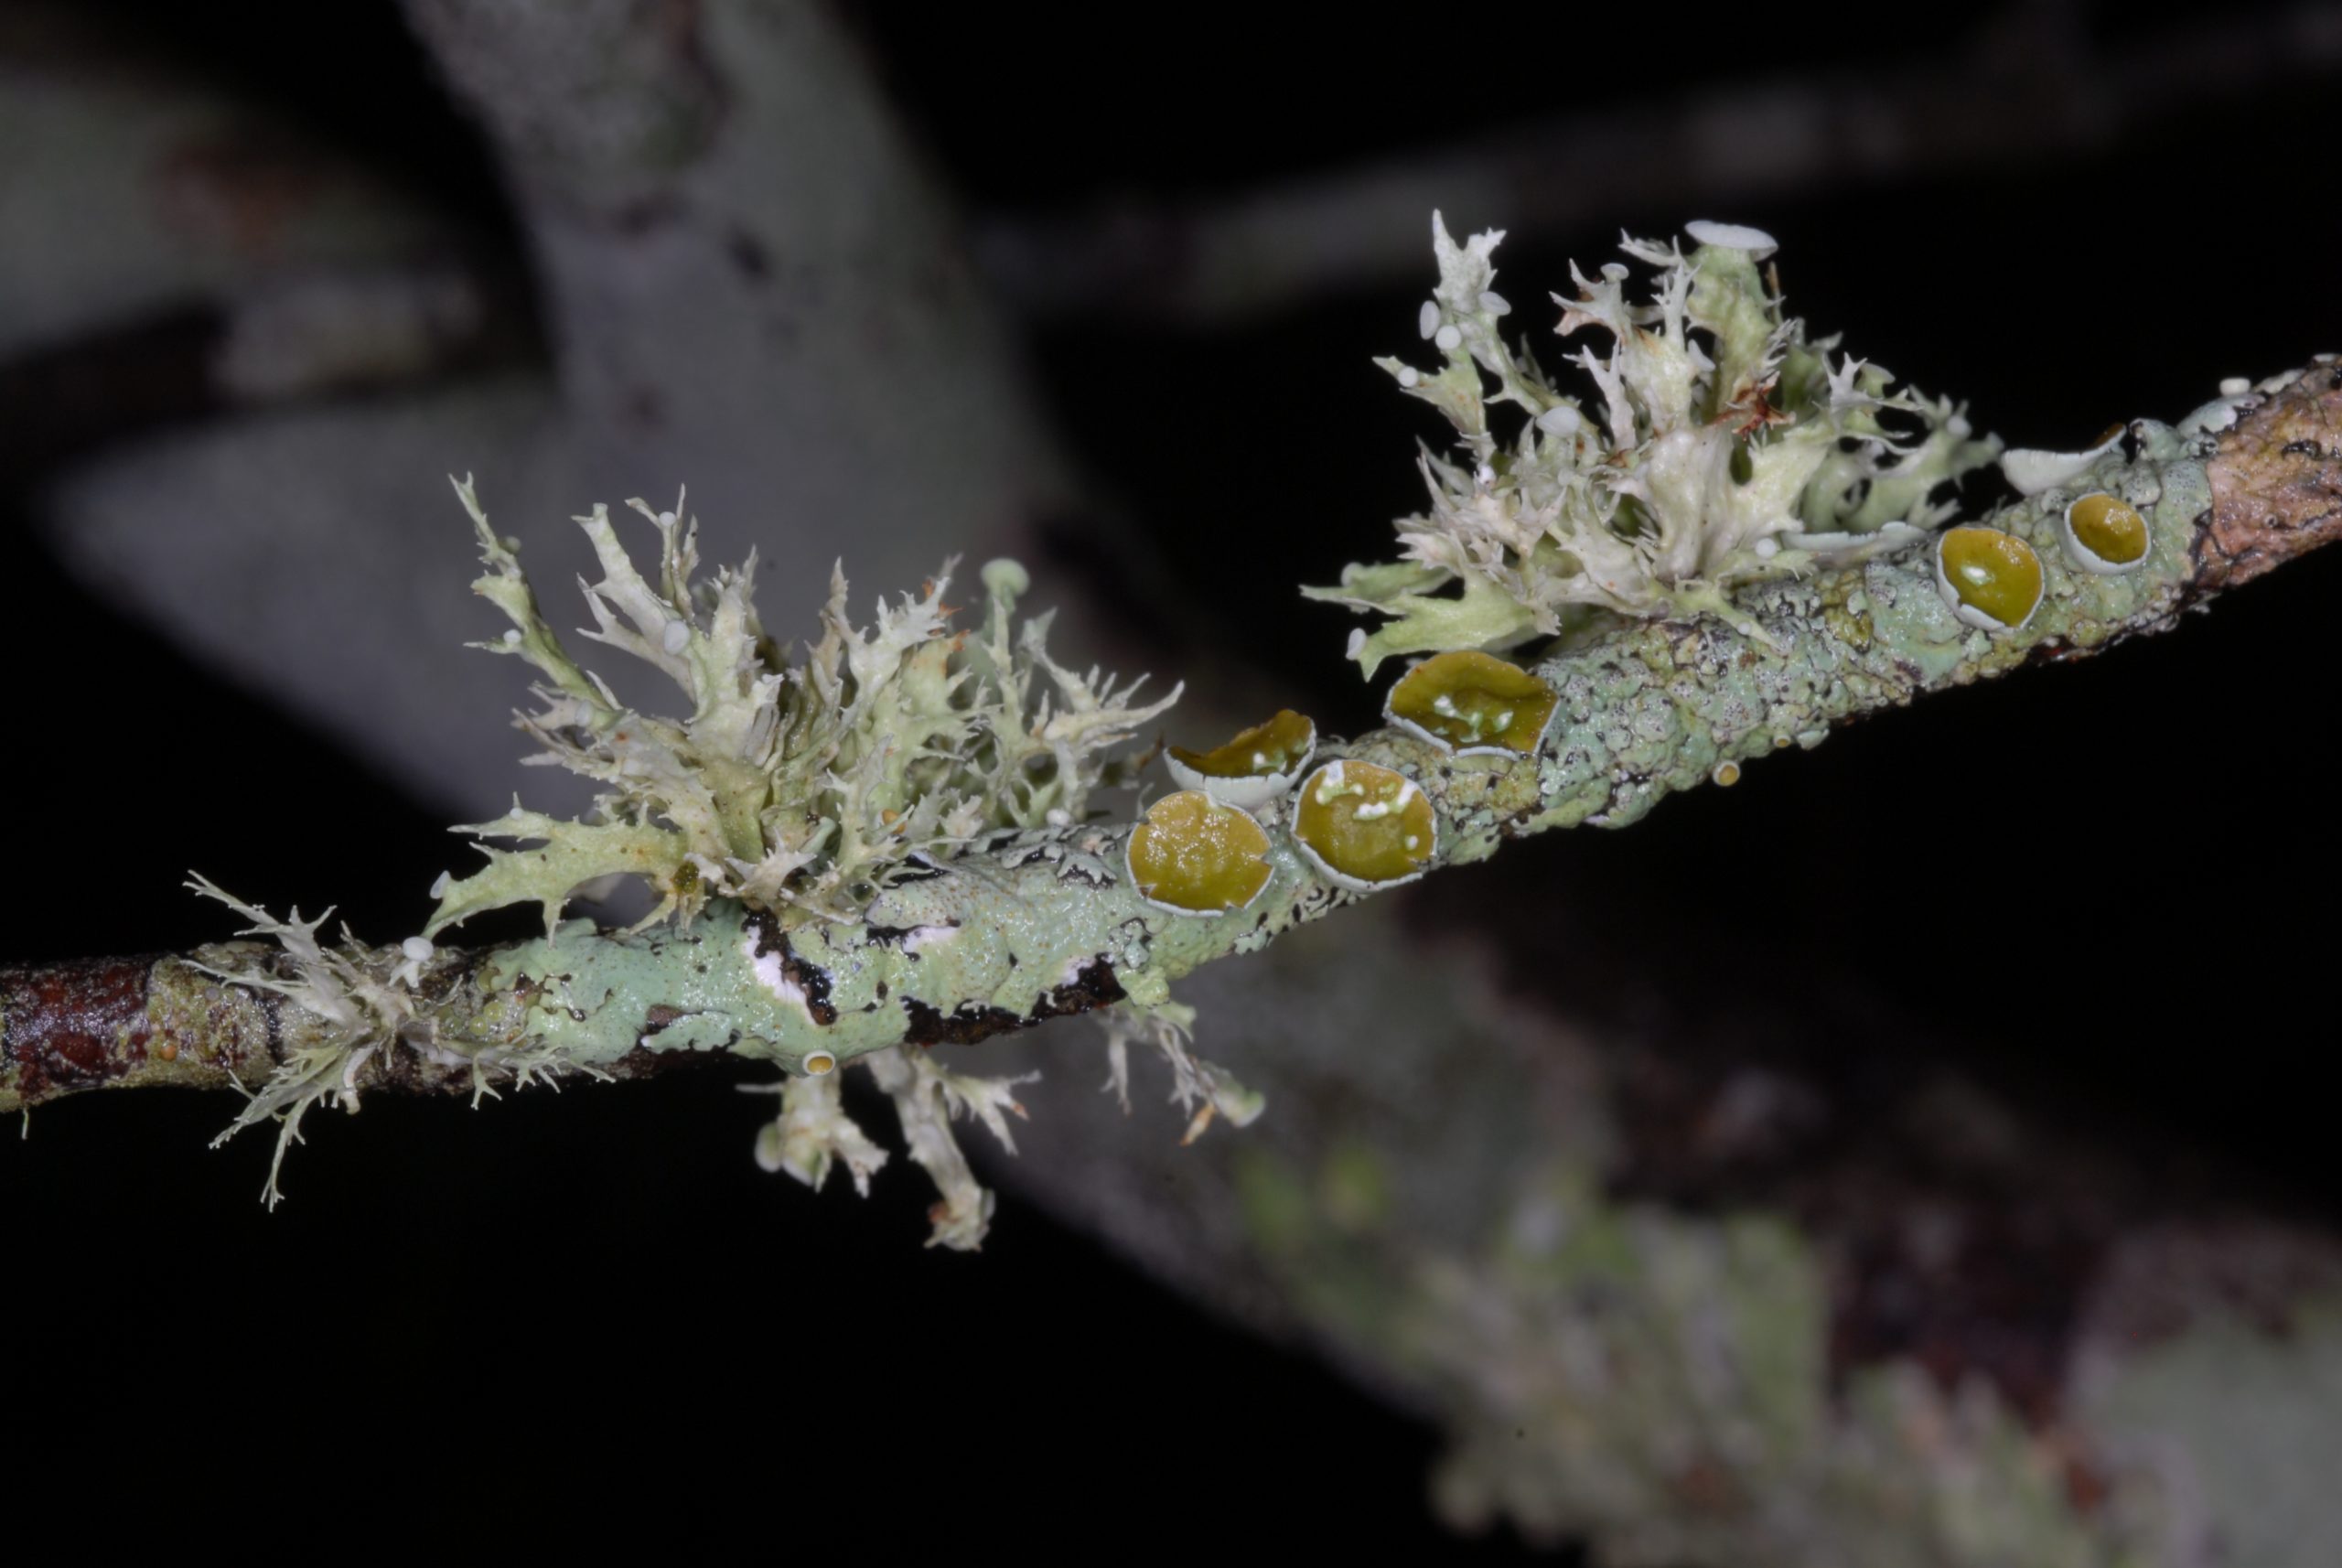 A typical branch covered with lichens, including Ramalina culbersoniorum and Myelochroa galbina. Fruticose lichens like Ramalina have been greatly impacted by air pollution and habitat fragmentation.